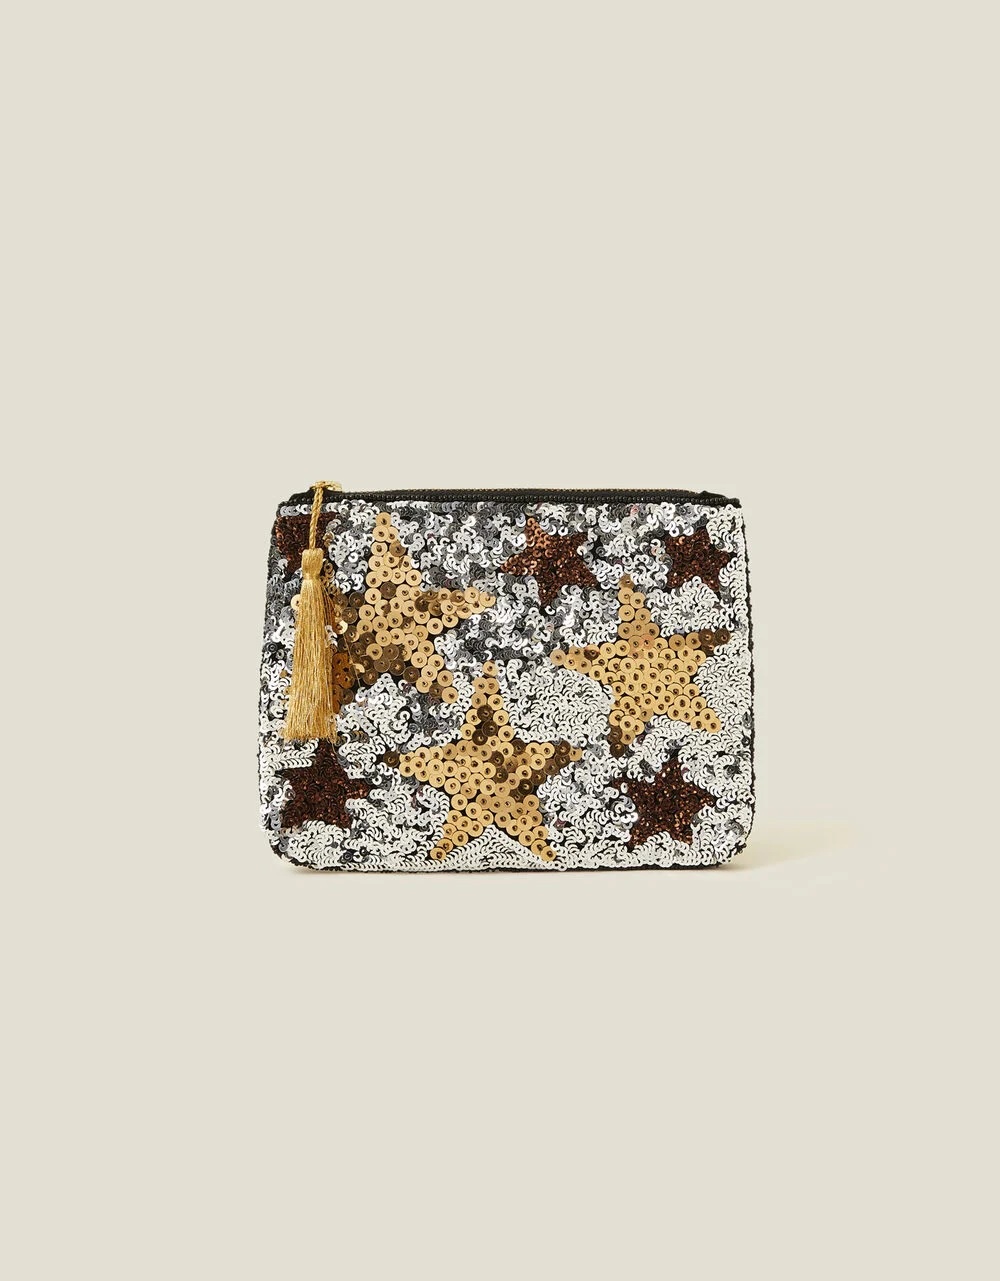 This sequin star pouch is down from £14 to £7 at Accessorize